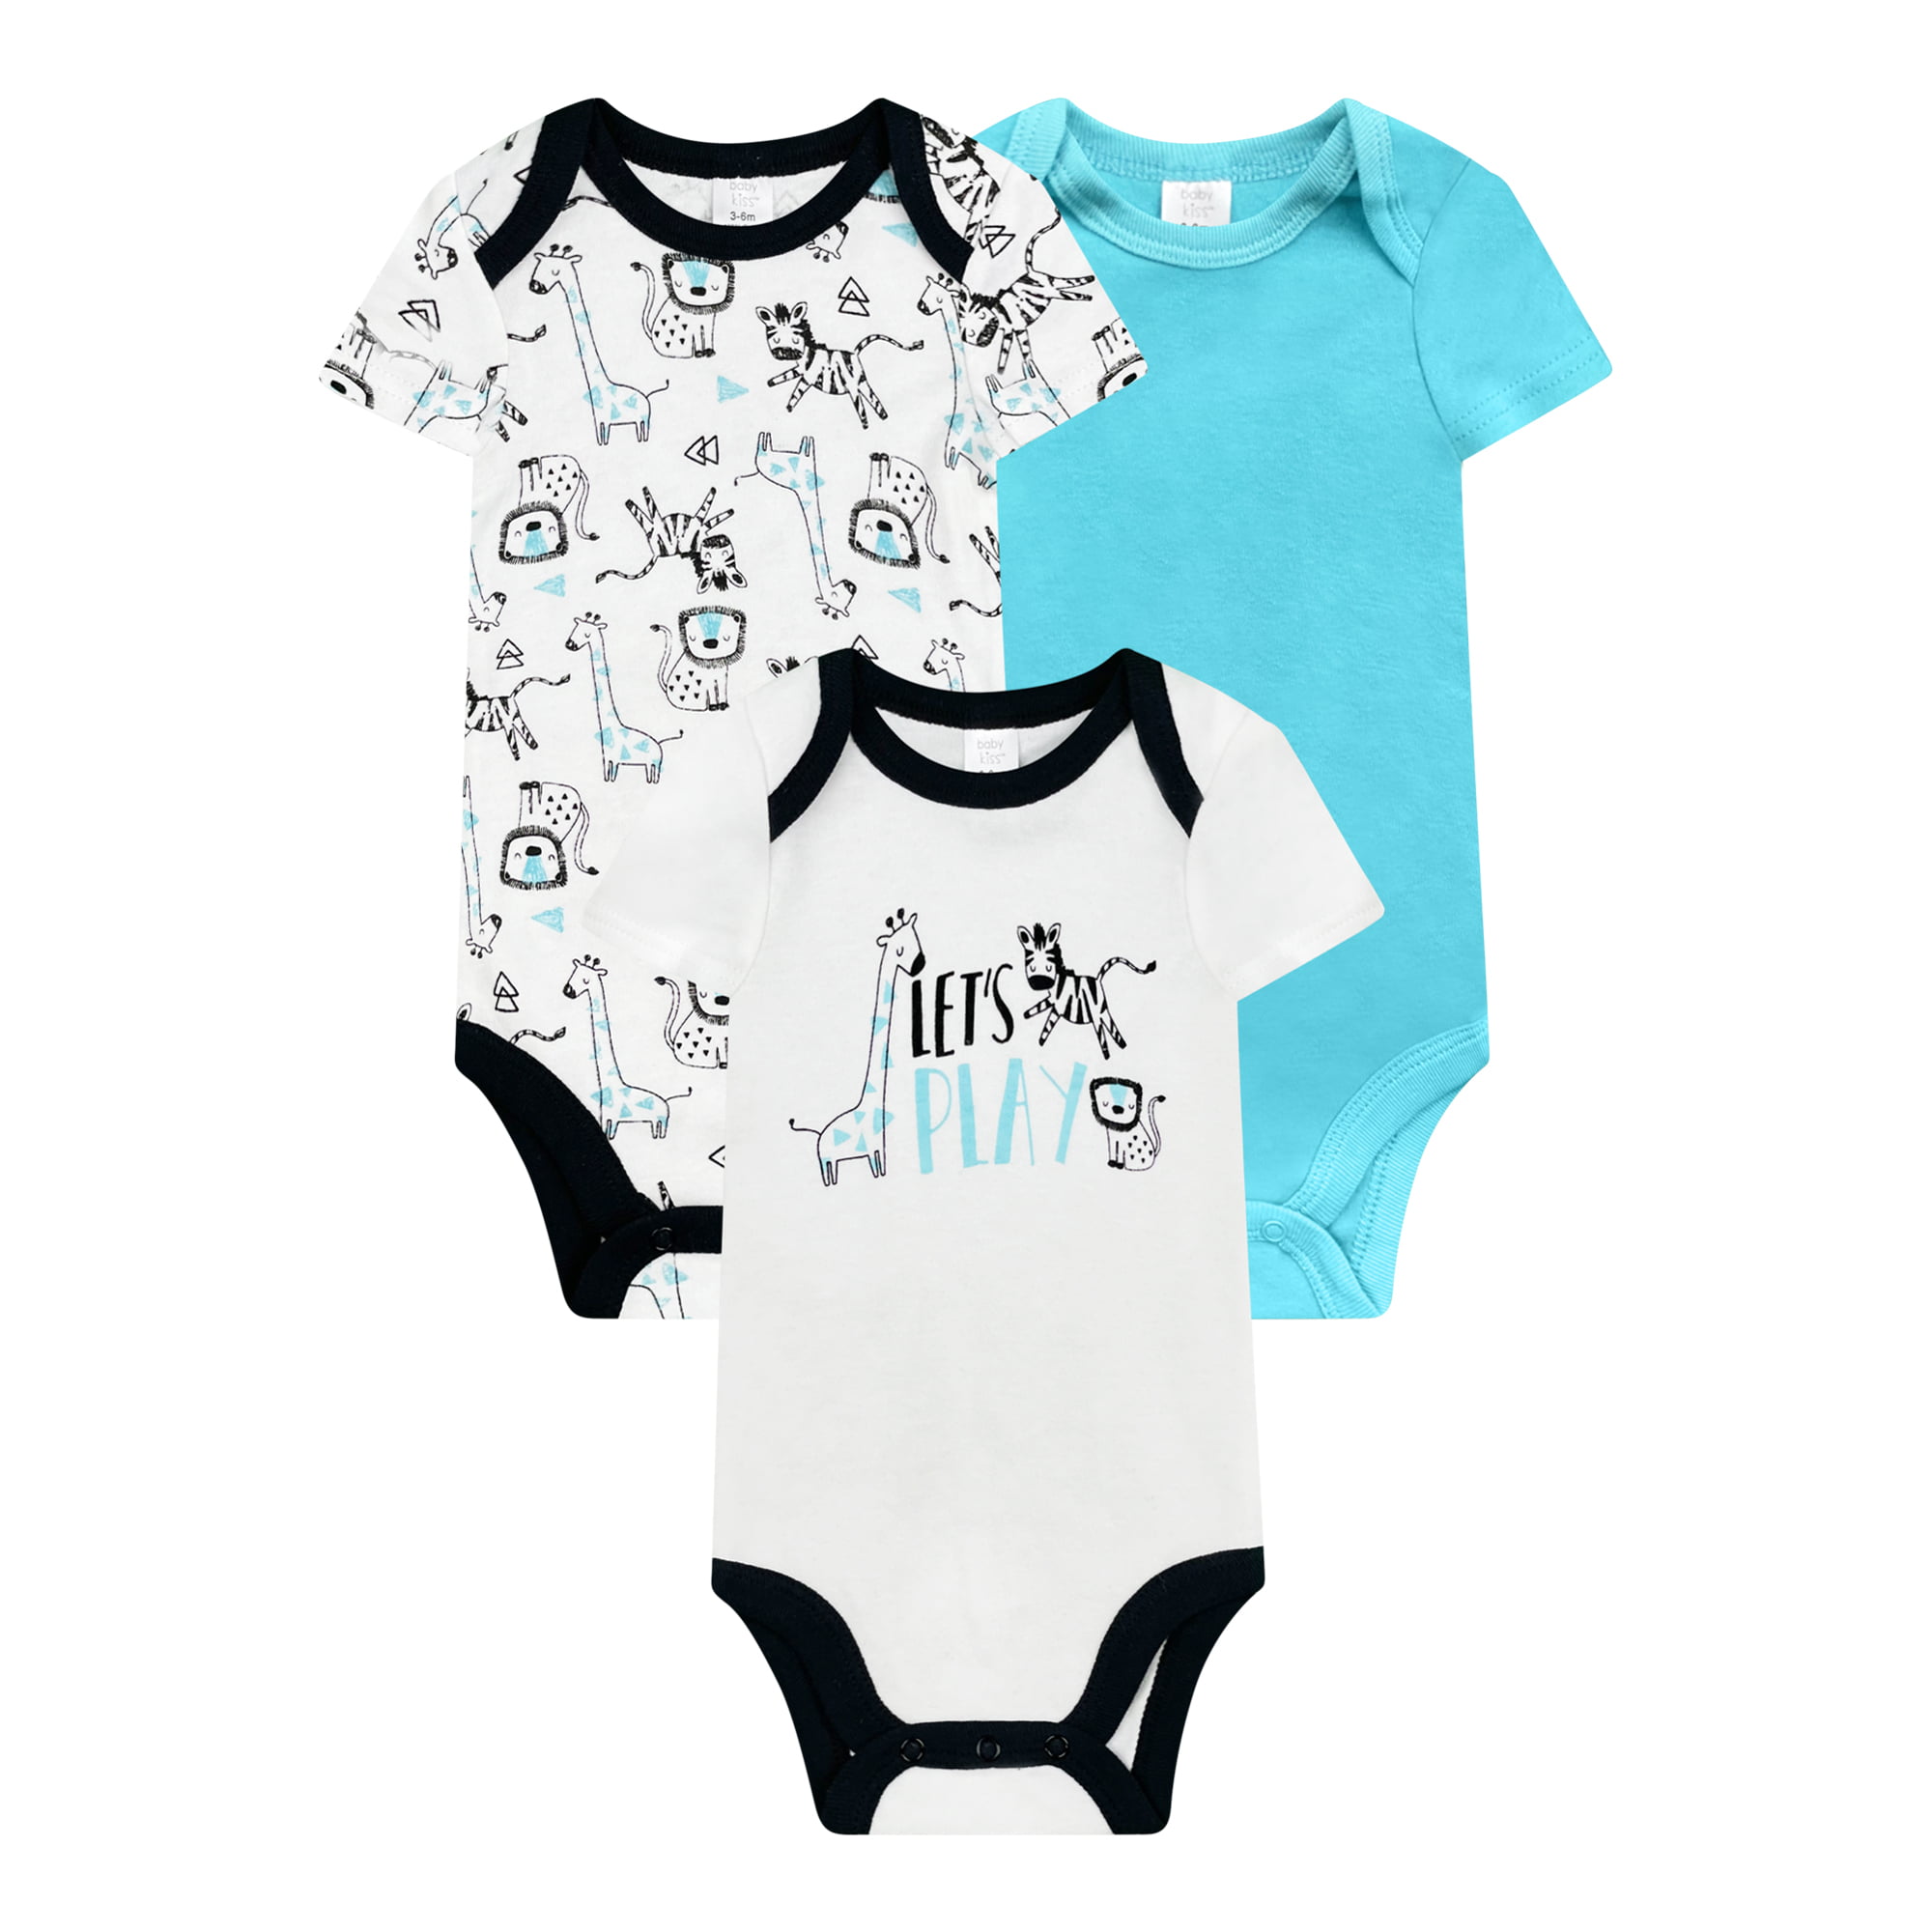 4-Pack Short-Sleeve Bodysuit for Baby Boys and Girls 100% Cotton Baby Onesies For Newborn & Infants Suitable 0-3 Months 